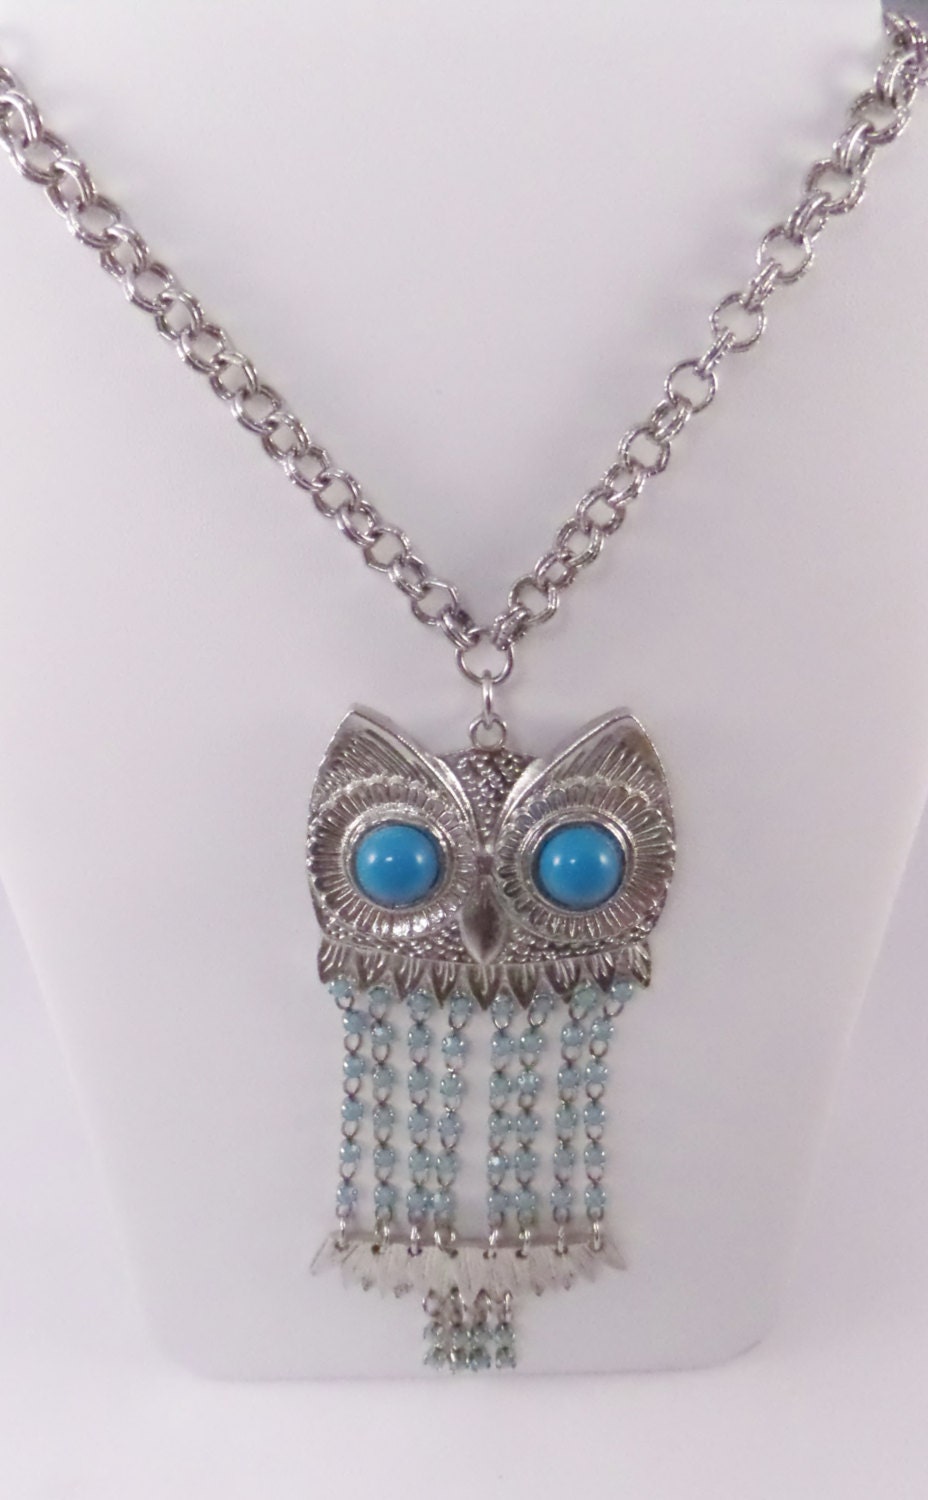 1970s Silver Owl Necklace Turquoise Prong Set Stones Pendant 5389